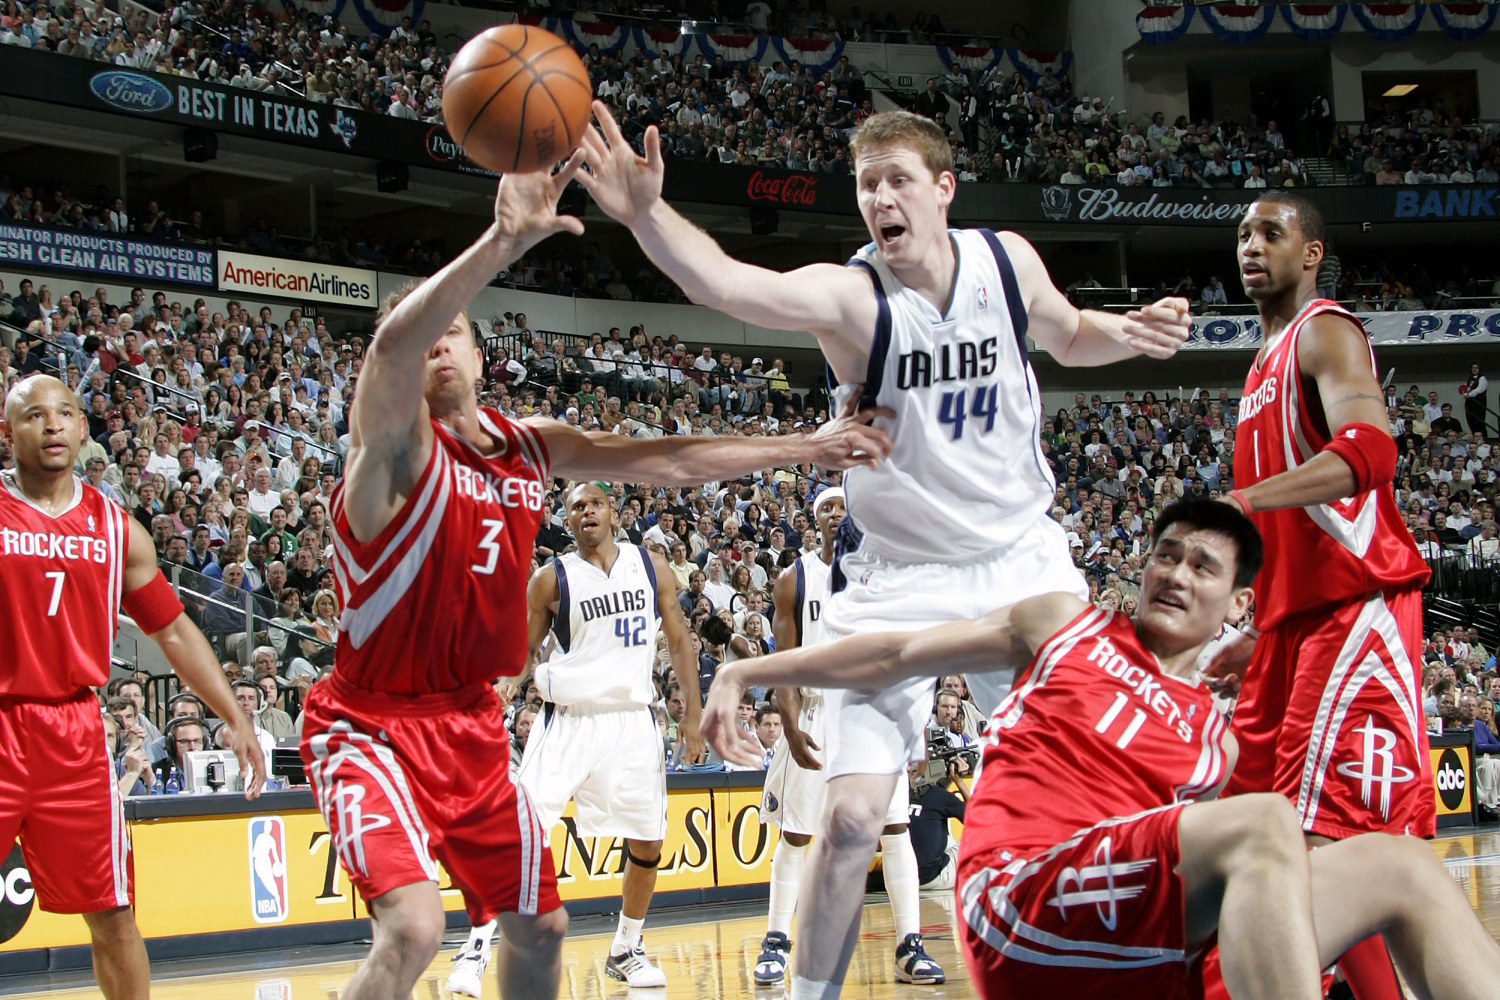 NBA Player Shawn Bradley Paralyzed After Being Hit By Car